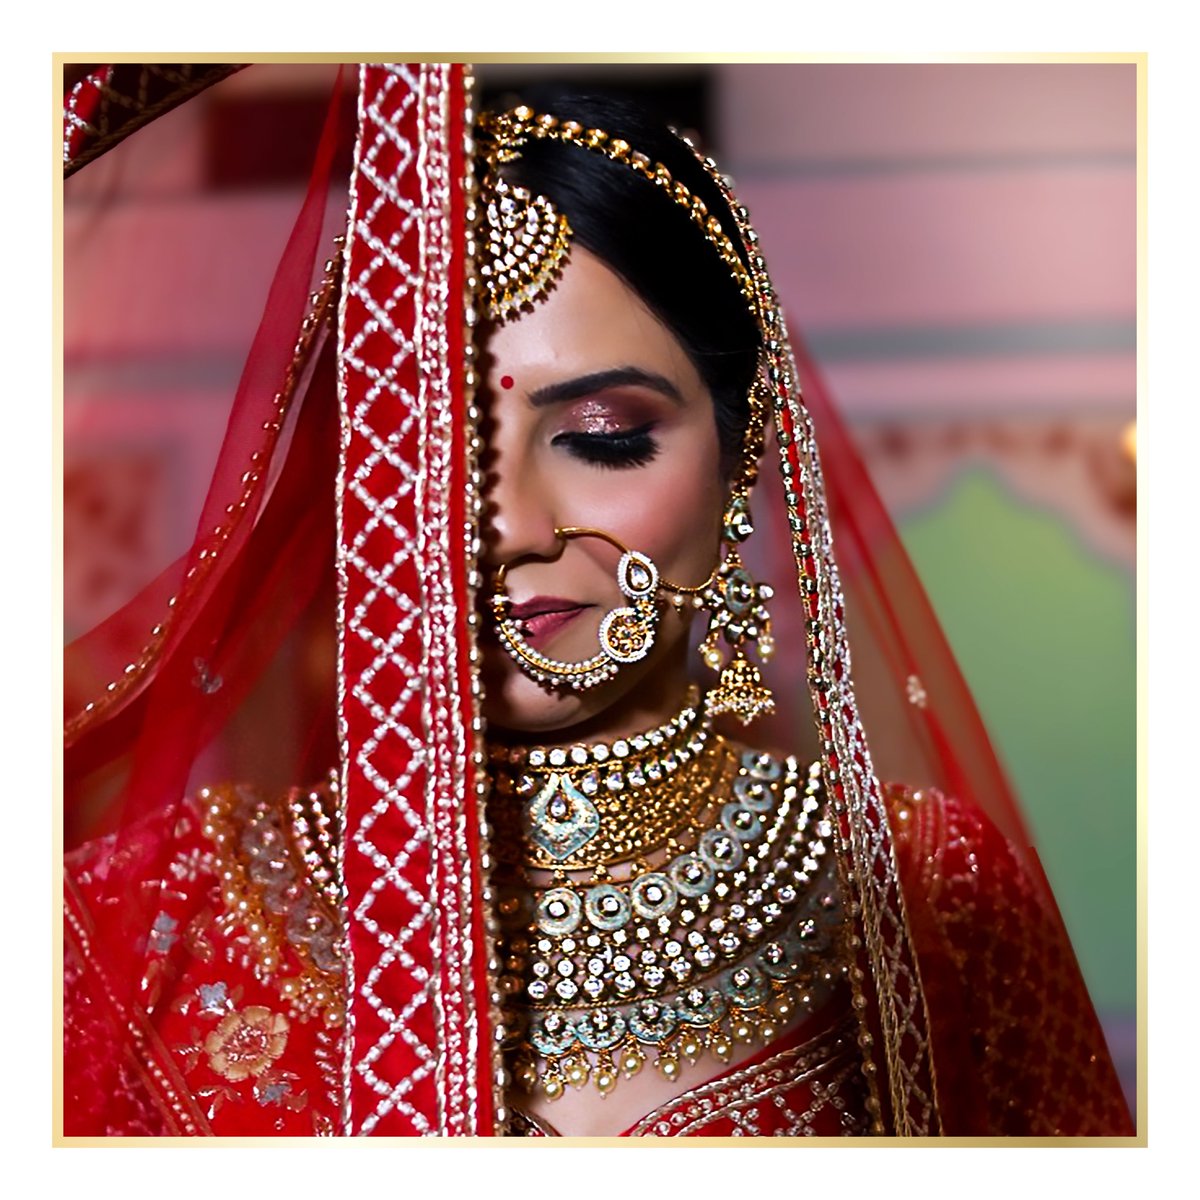 An #Indian #bride exudes pure confidence on her #weddingday while wearing her #weddingjewellery. 

#Jewellery set by The Velvet Box - #Wedding Essentials.

To buy/rent from our #jewelry collection, contact us via DM, call & #WhatsApp +91 977 246 3313.

#GoaHeritageFestival #shop